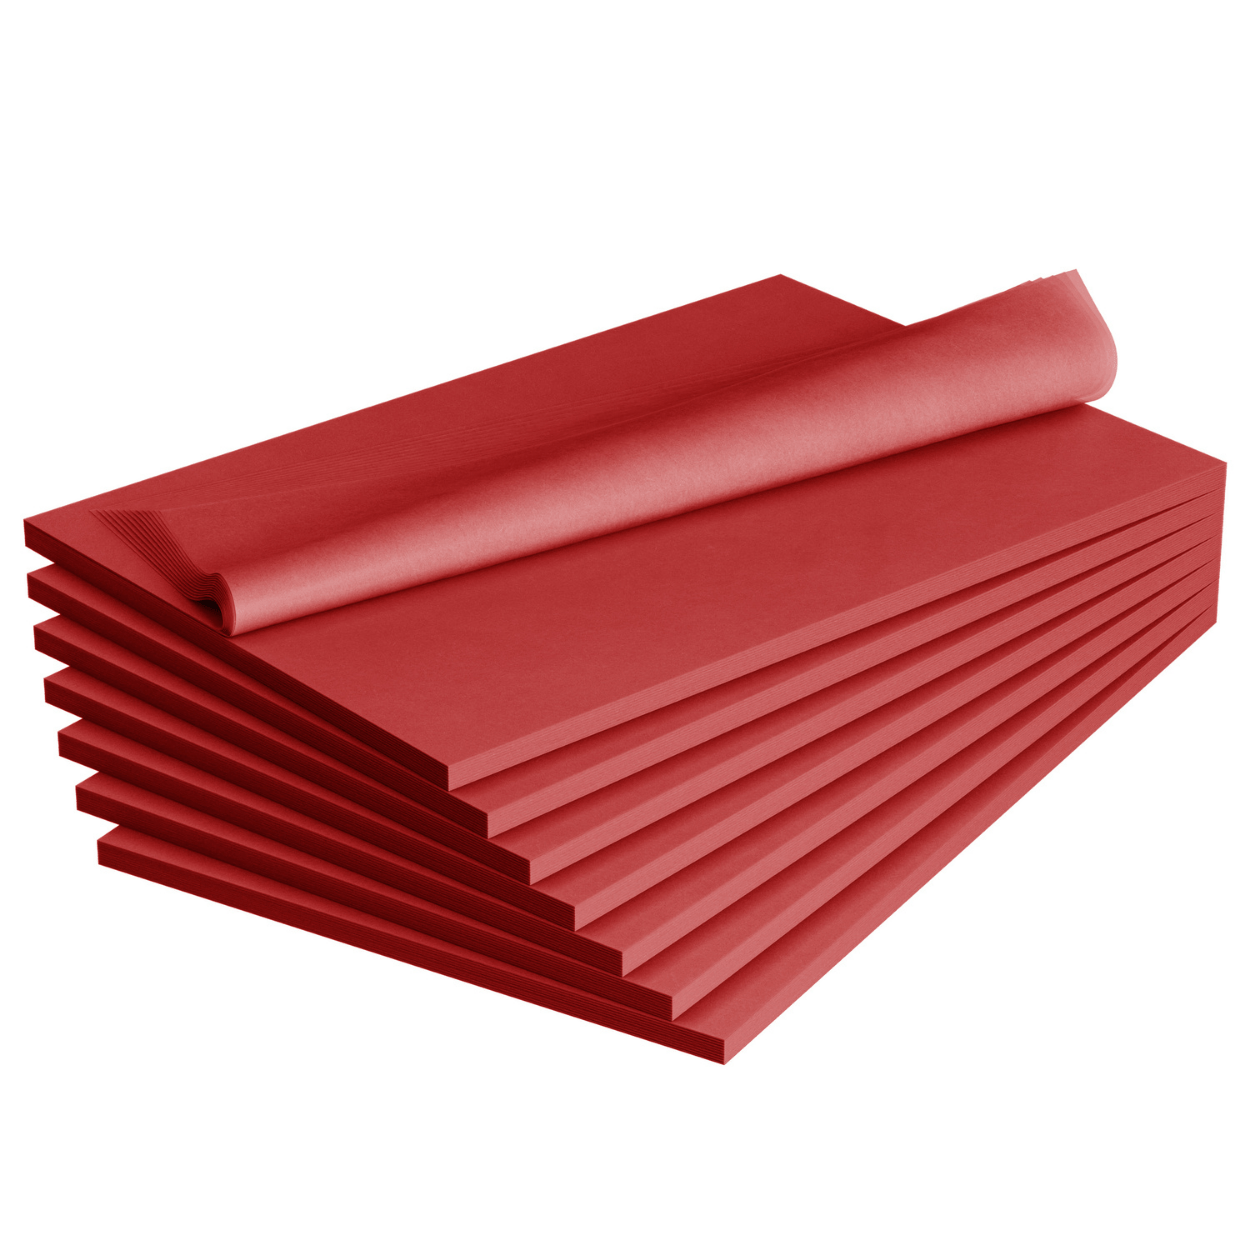 Case of Red Tissue Paper - 20x30